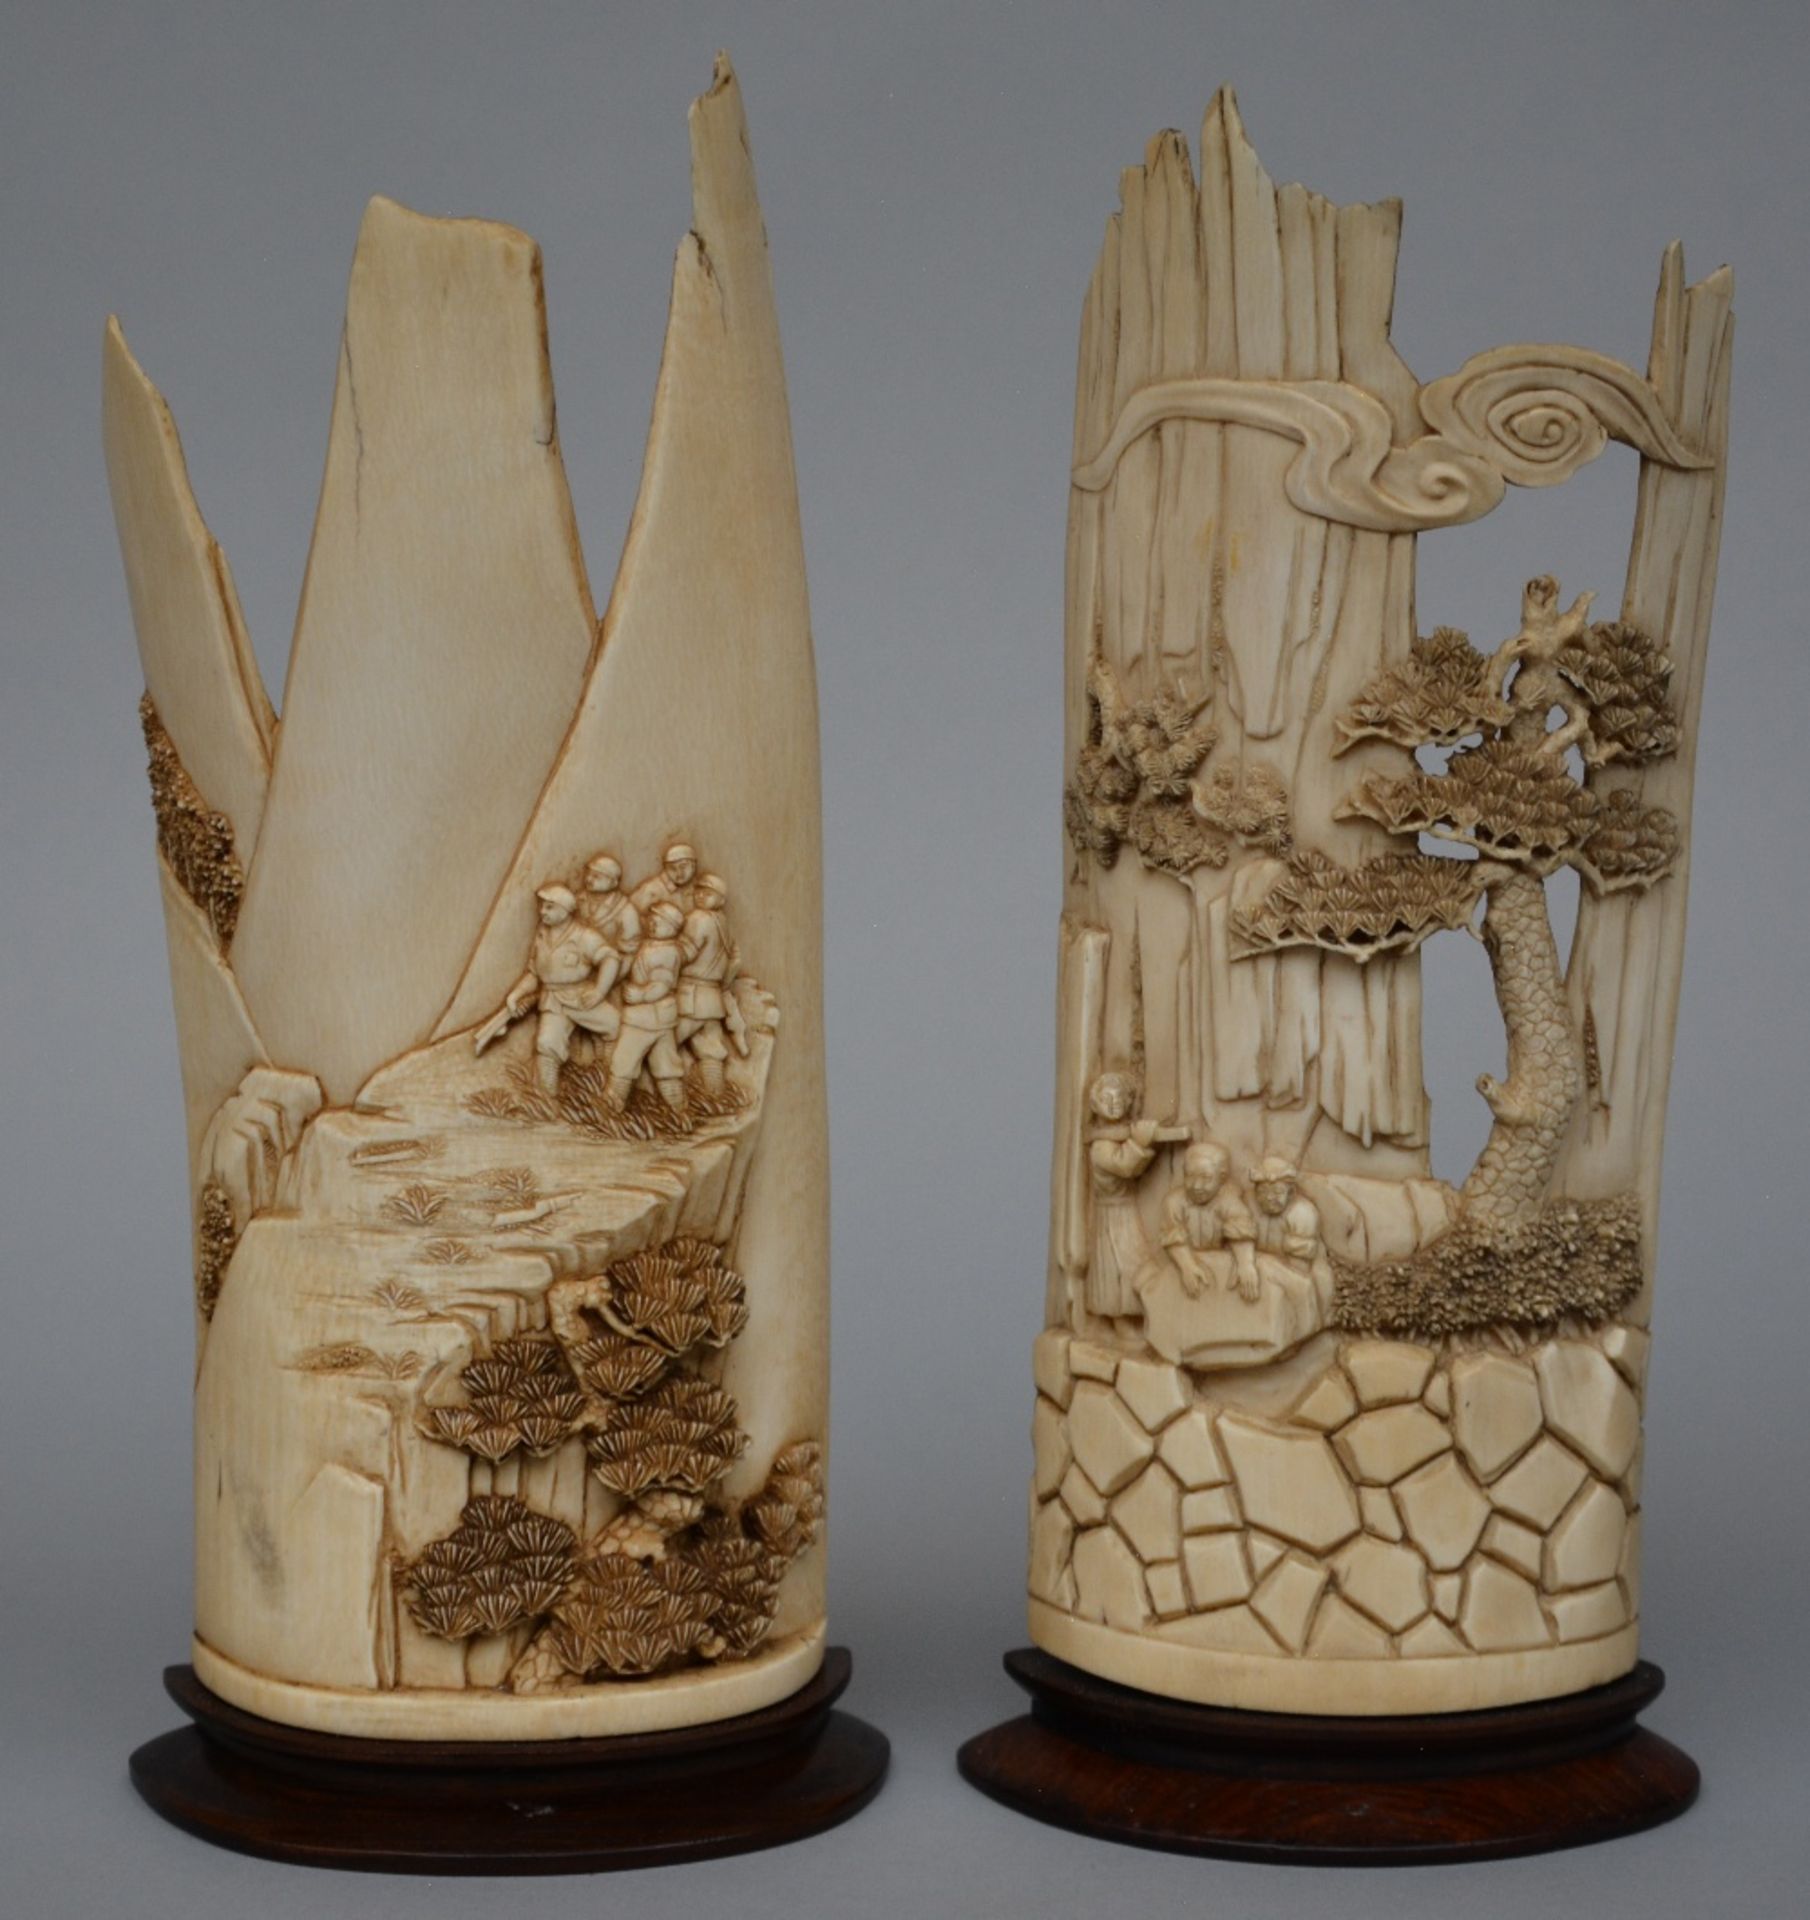 Two ivory plaques carved with animated scenes in a landscape, on a fixed wooden base, Republic